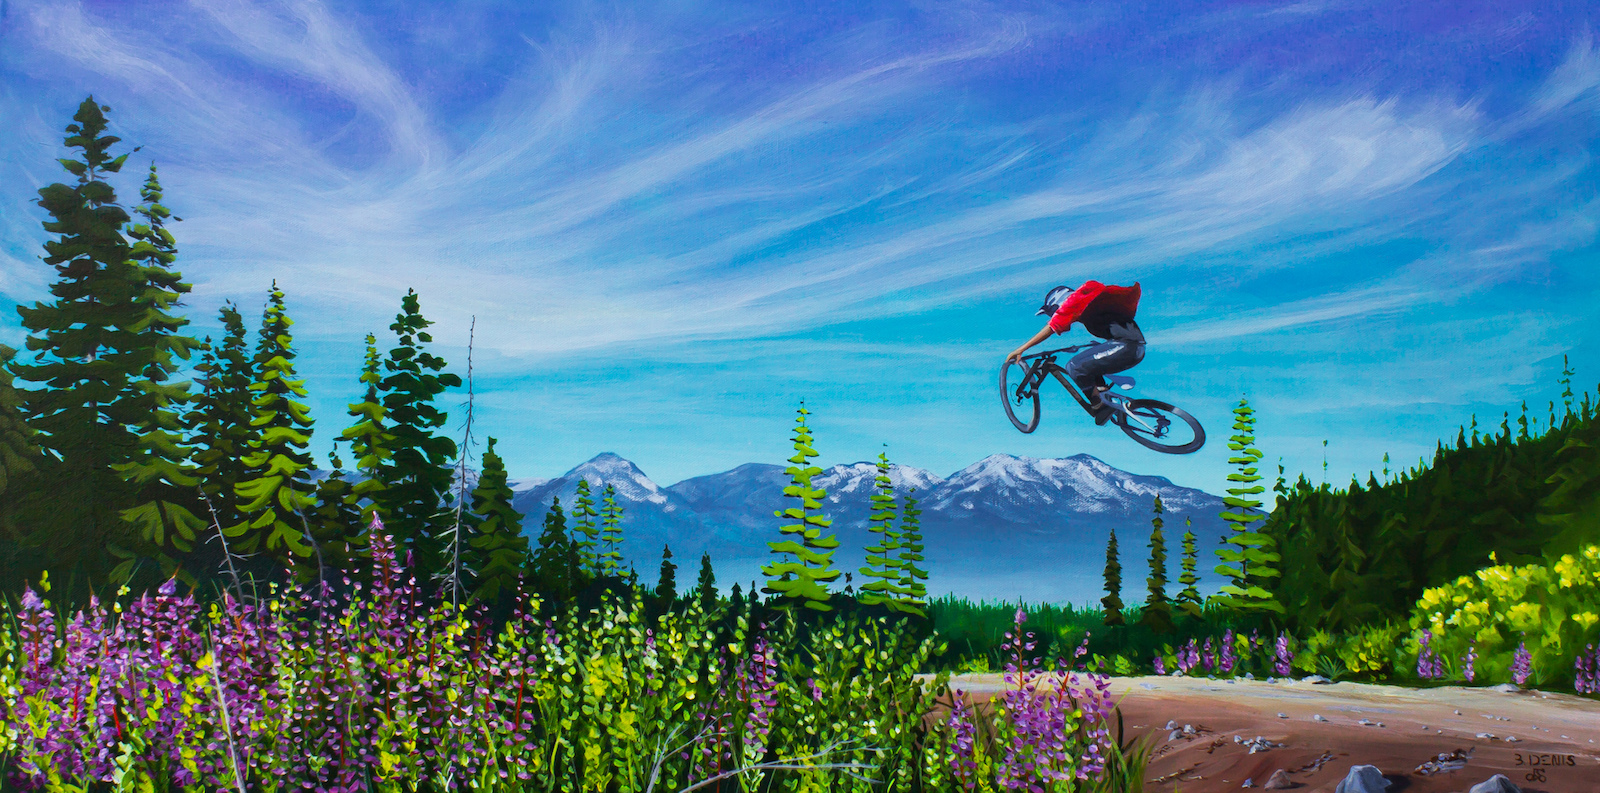 Whistler Whip
18" x 36" Painting
Acrylic on Canvas
Available for $400